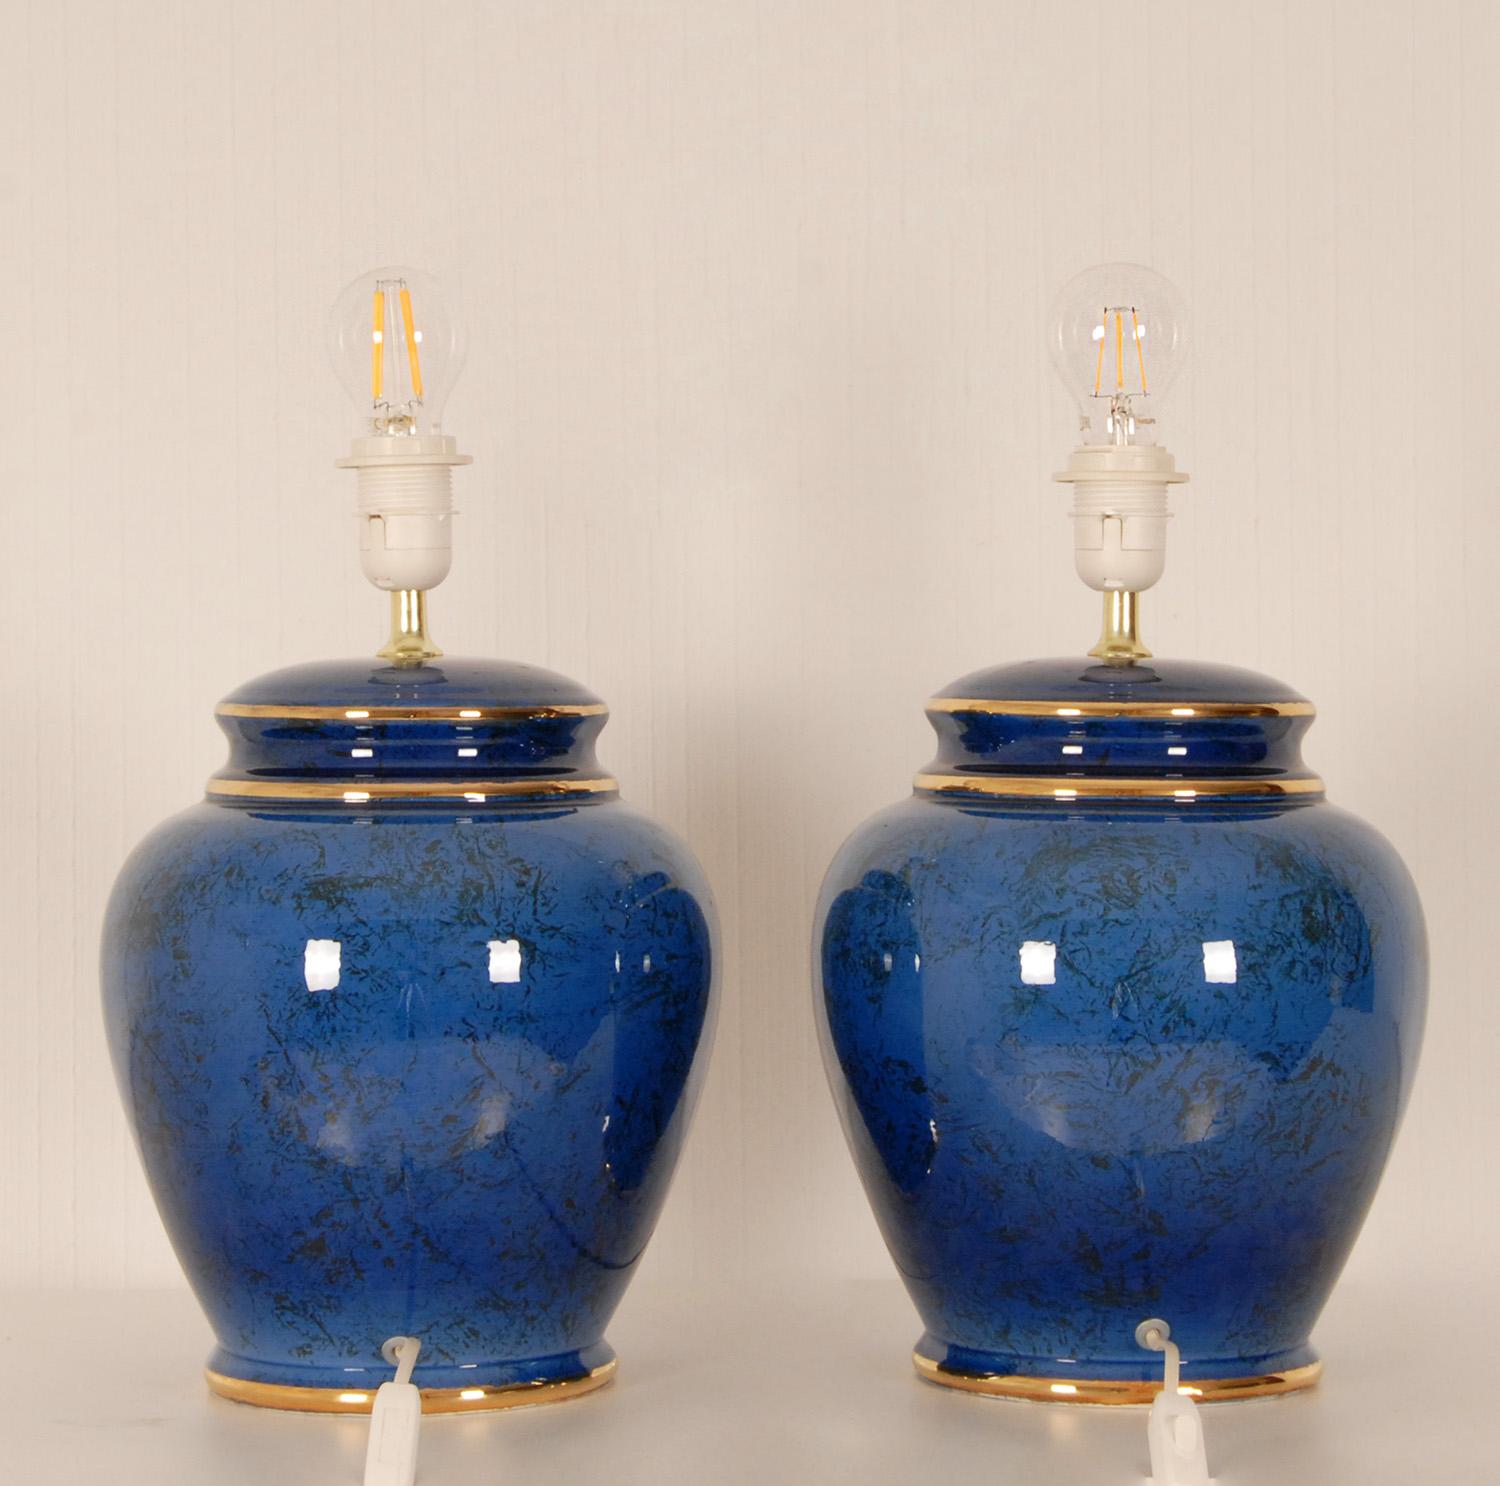 Mid-Century Modern Vintage French Ceramic Lamps Blue Gold Chinoiserie Jars Vase Table Lamps a Pair